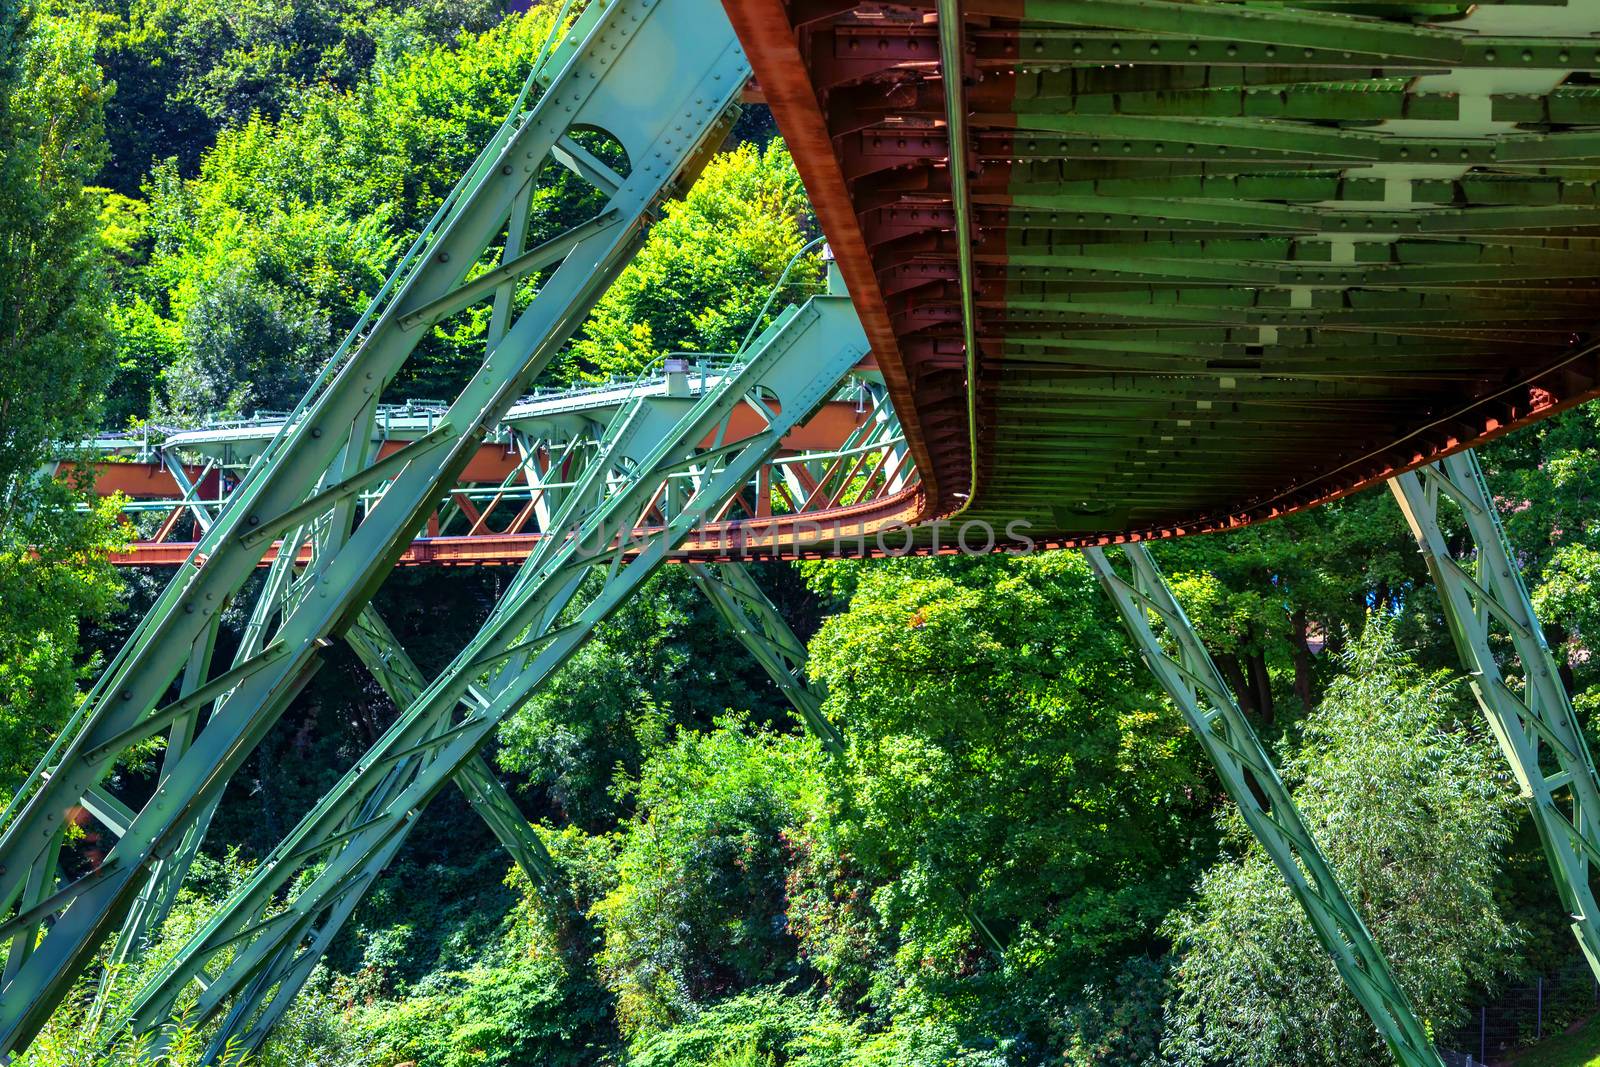 The supporting framework of the Wuppertaler suspension railway consists of a steel framework with inclined supports and suspended steel bridges so-called Rieppelträger. 